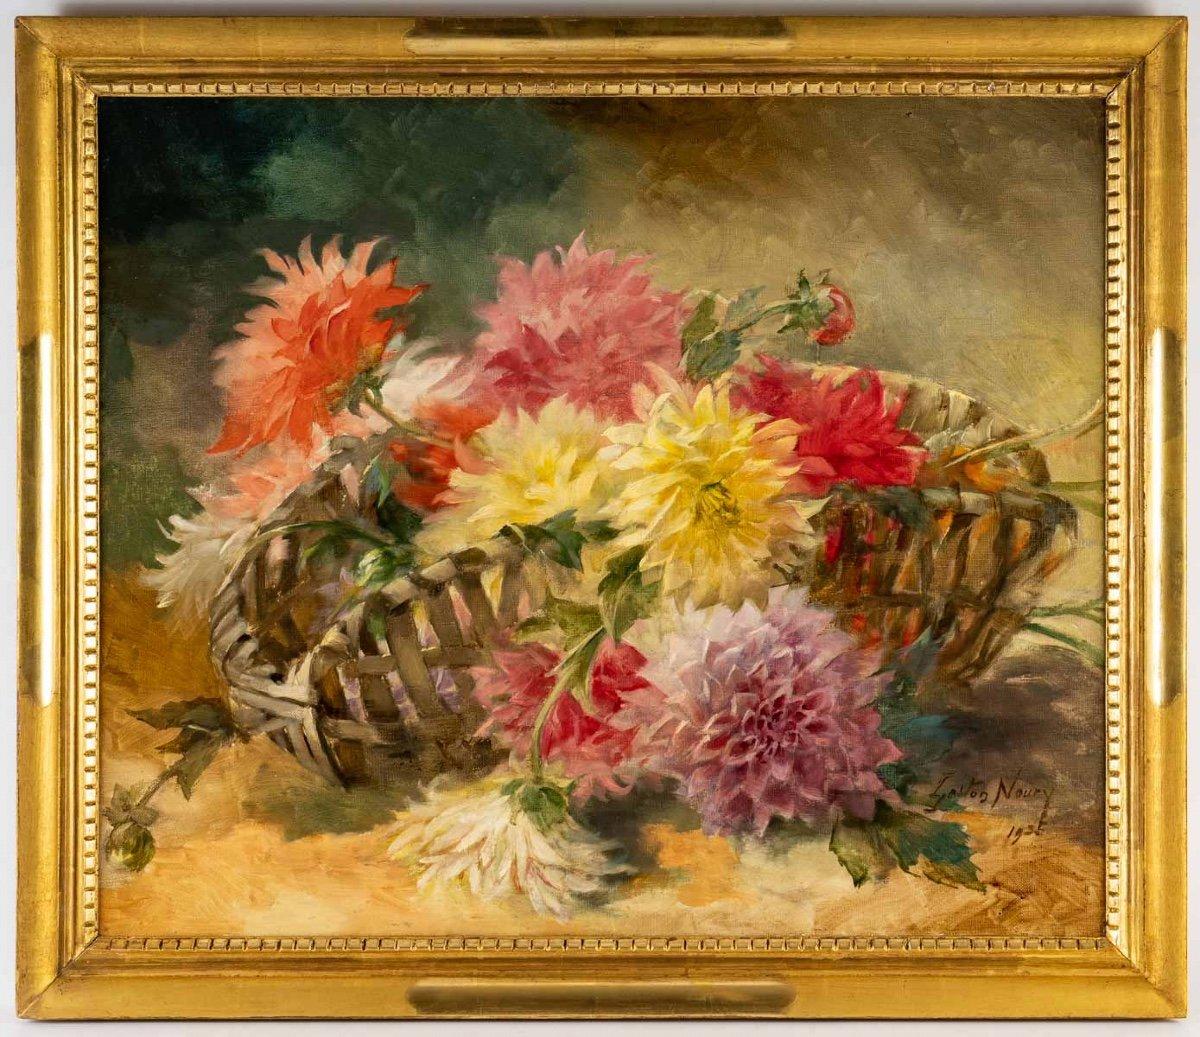 French Triptych Oils On Canvas - Still Life - Gaston Noury - Circa: 1935 - Period: Art  For Sale